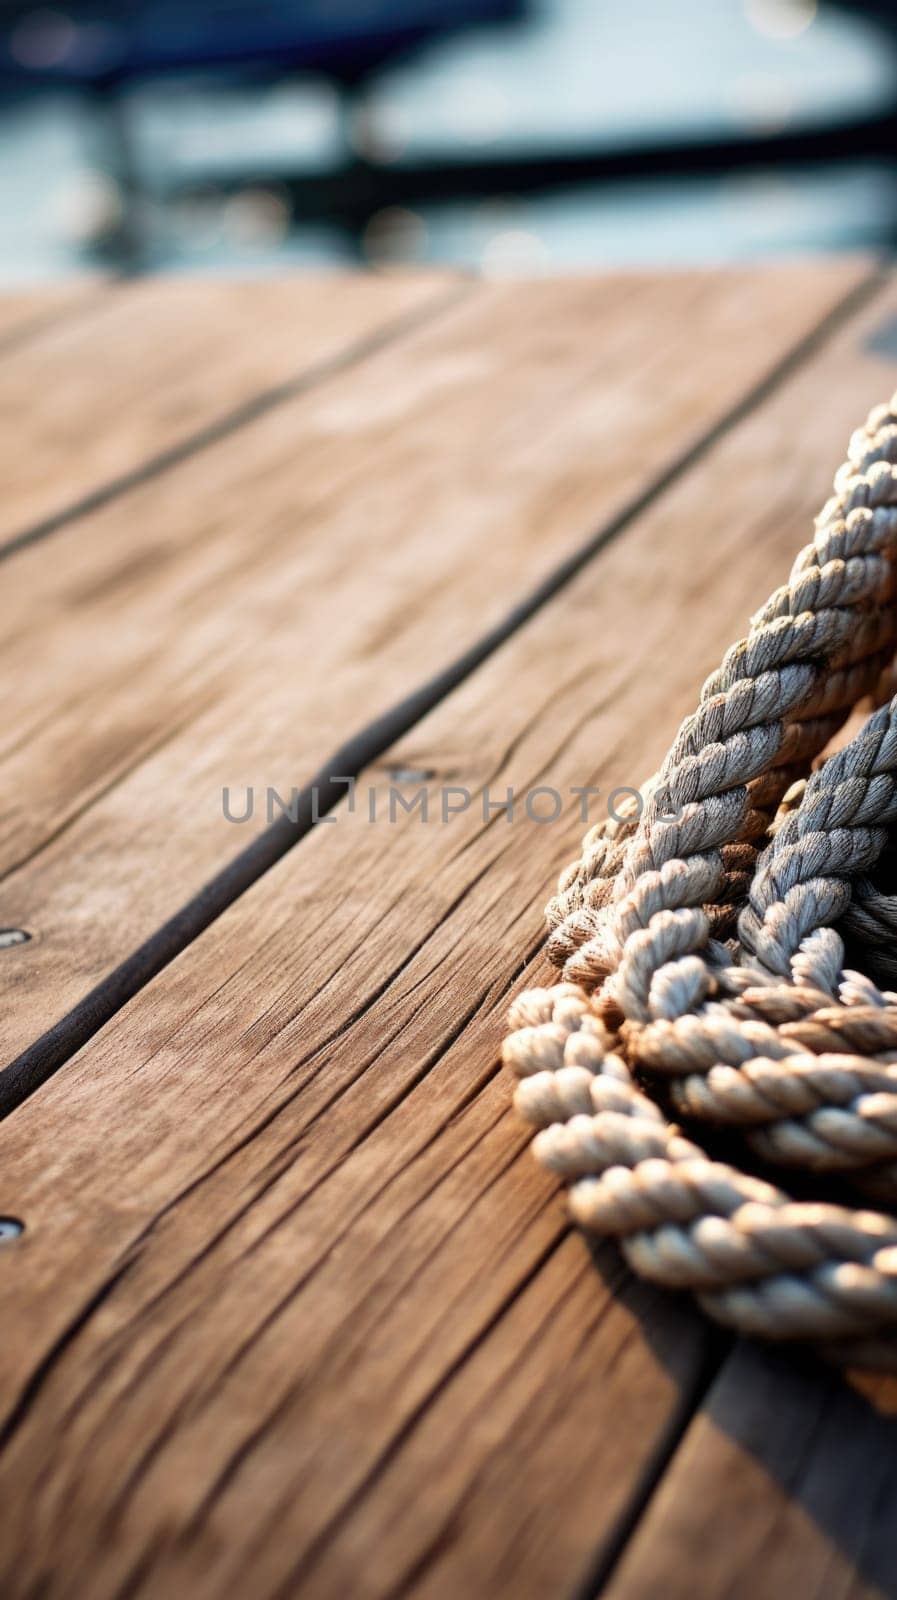 Rope on wooden deck with boats in background, AI by starush